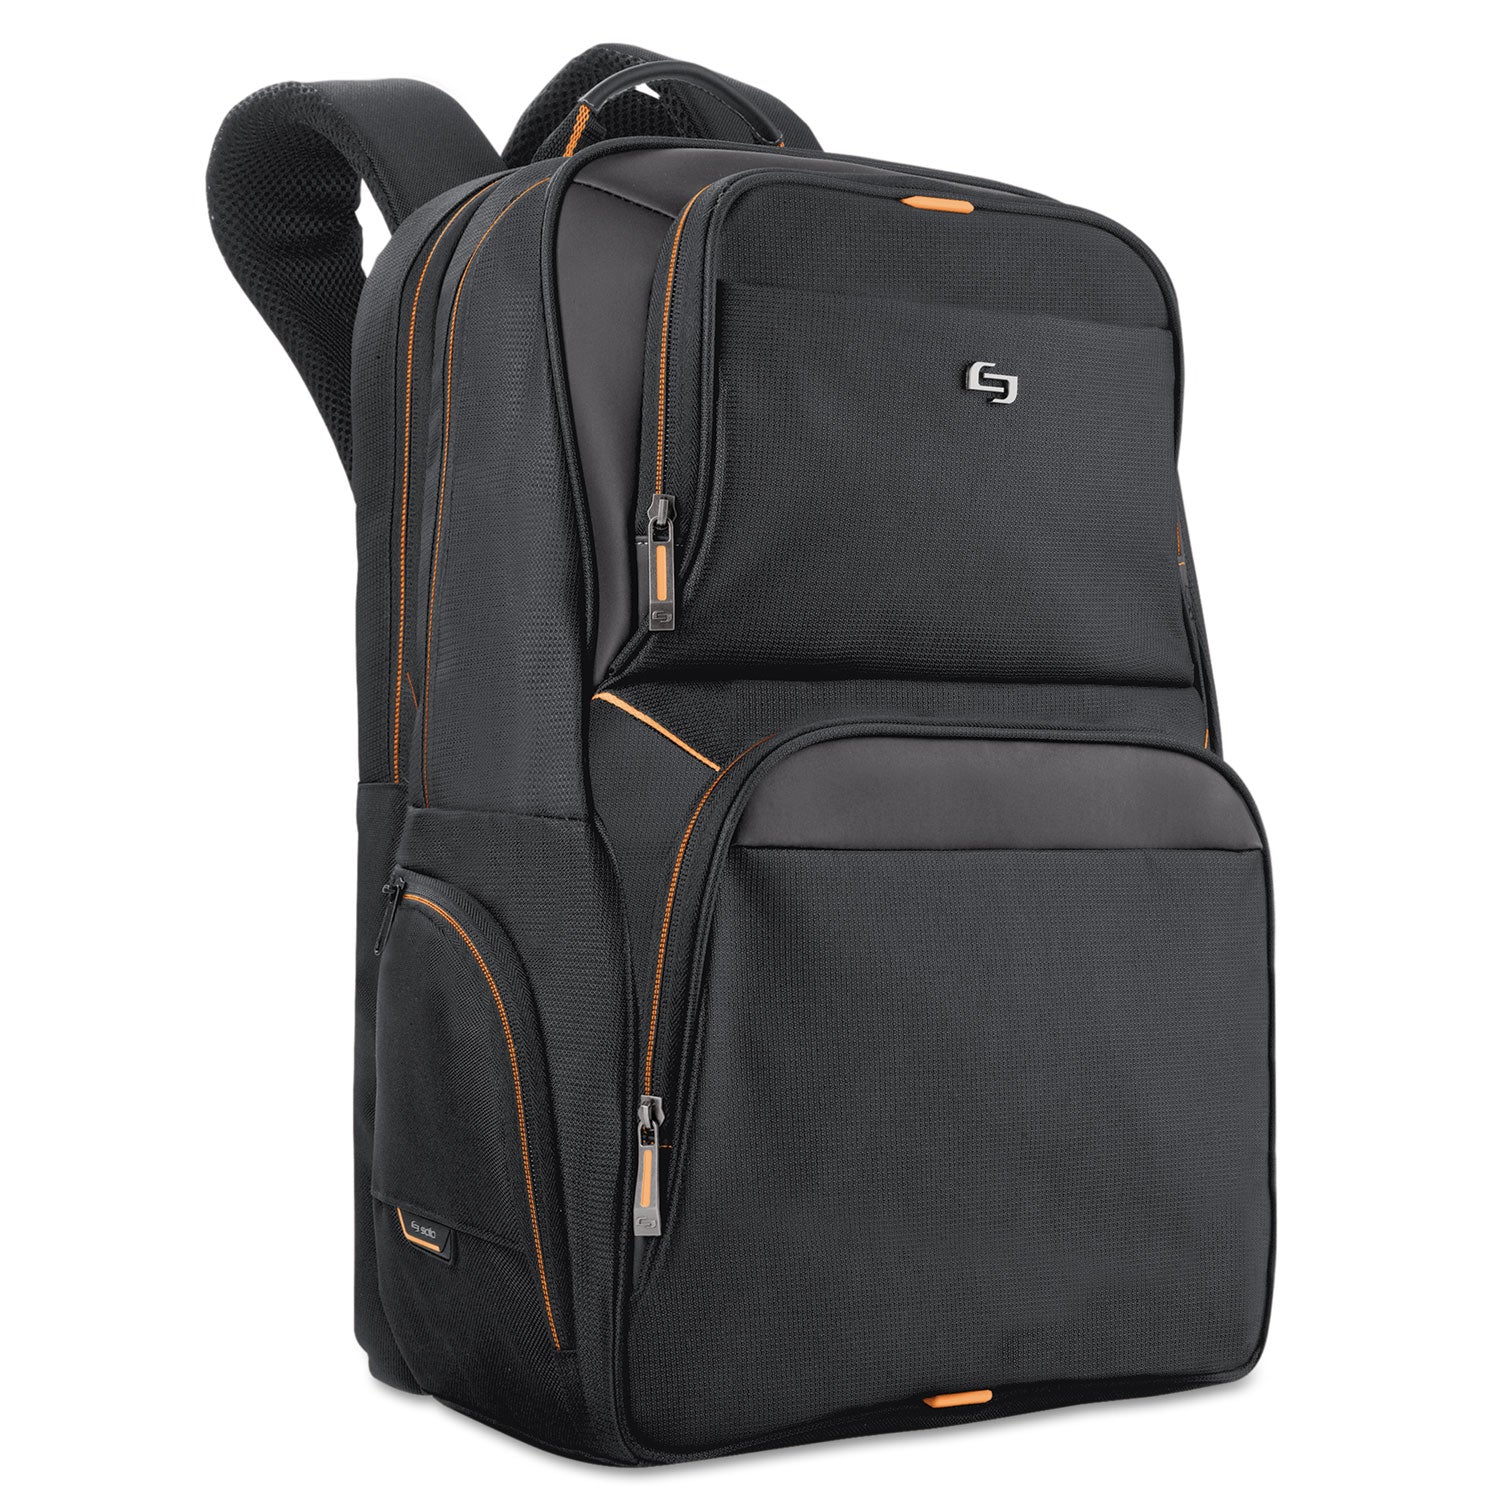 Urban Backpack, Fits Devices Up to 17.3", Polyester, 12.5 x 8.5 x 18.5, Black - 